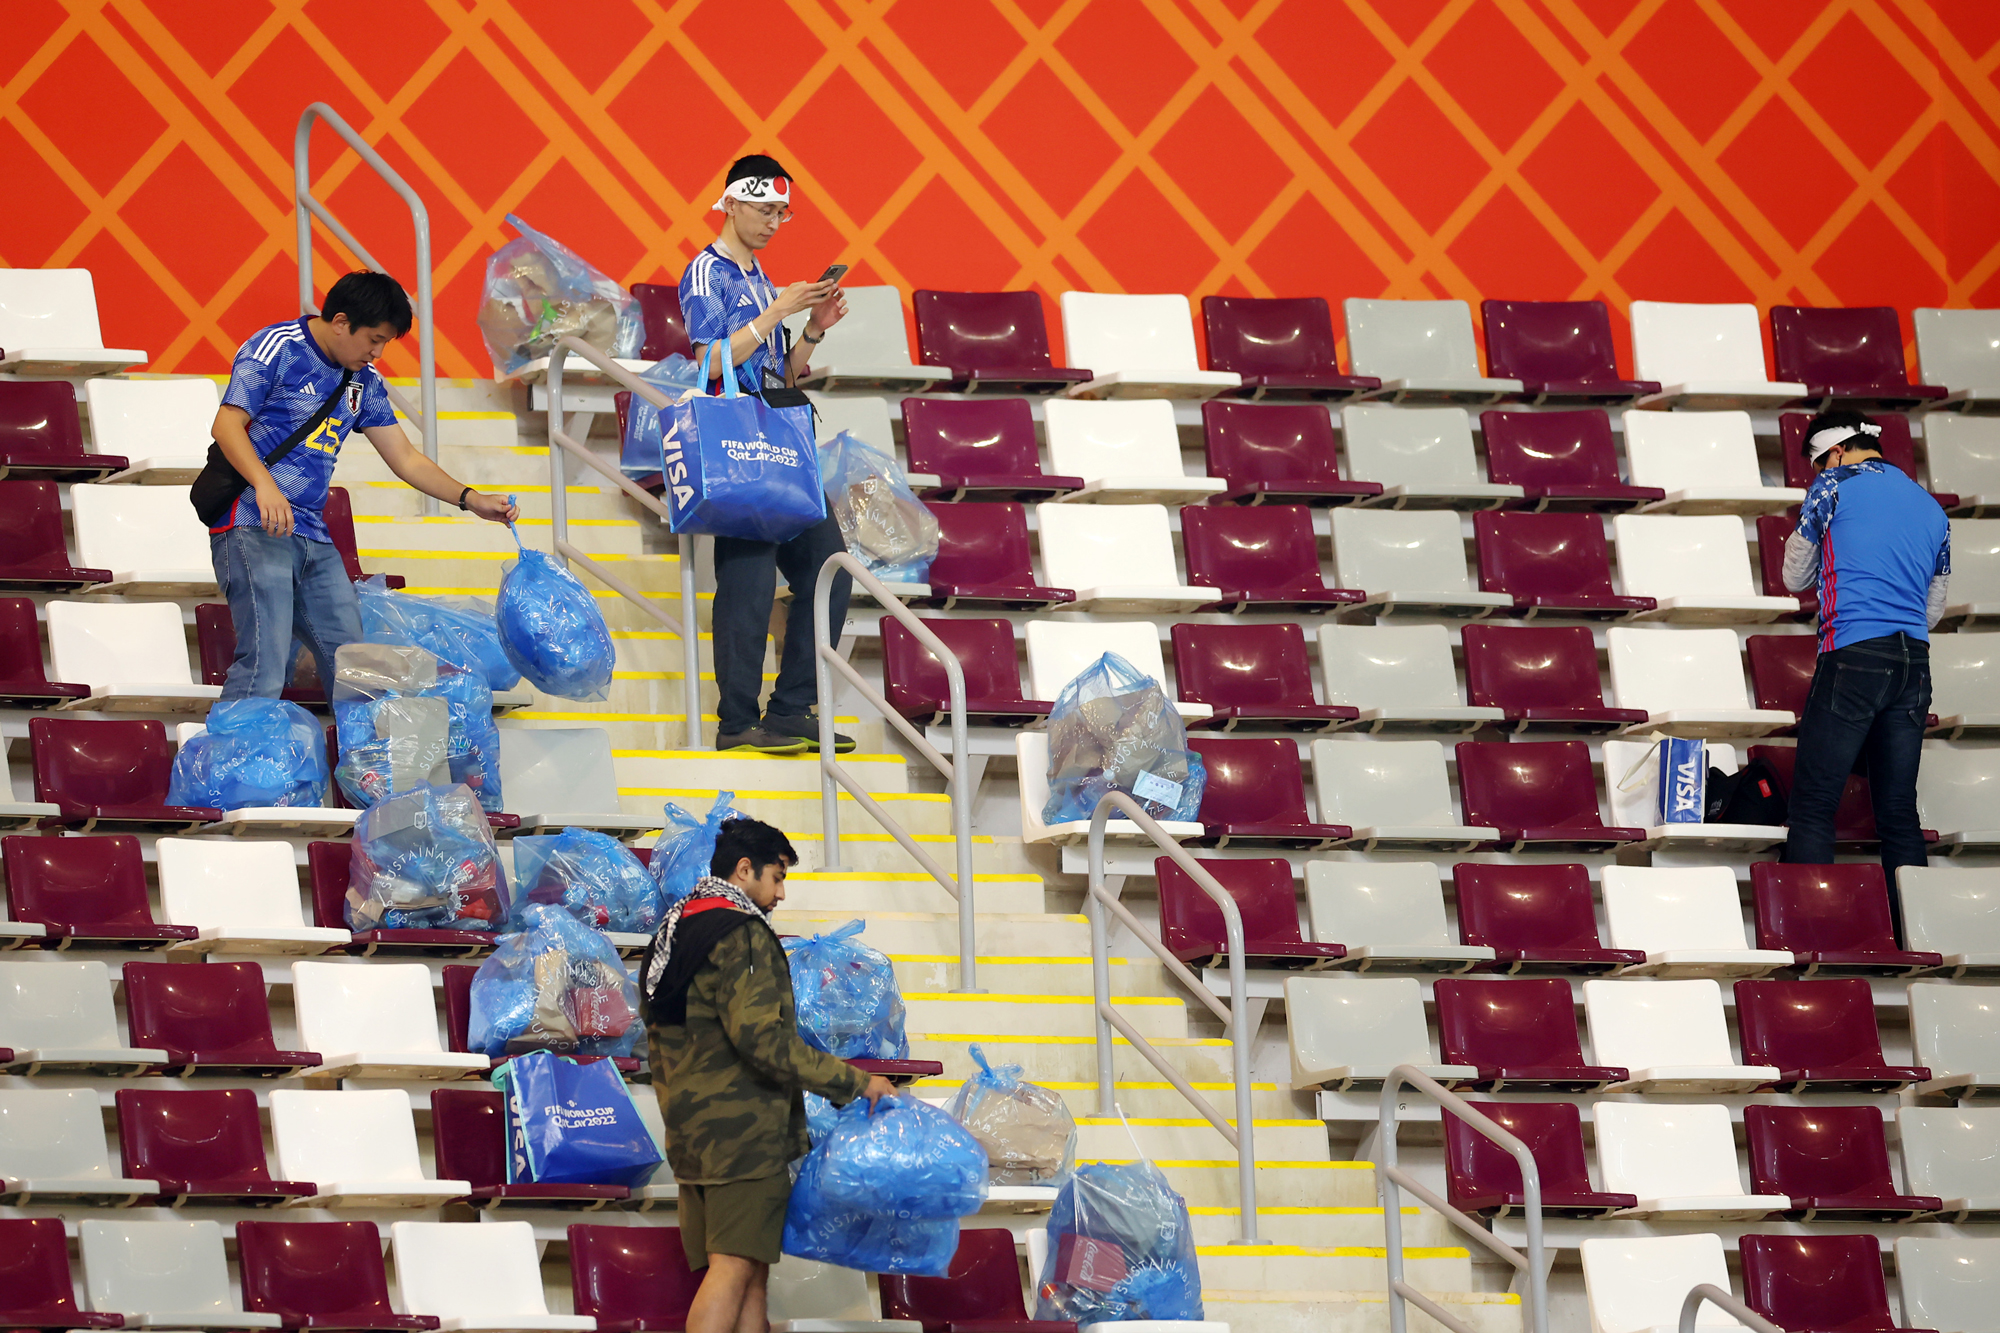 Japanese fans clear garbage from the stands after the Germany and Japan match at Khalifa International Stadium in Doha, Qatar on Wednesday. 